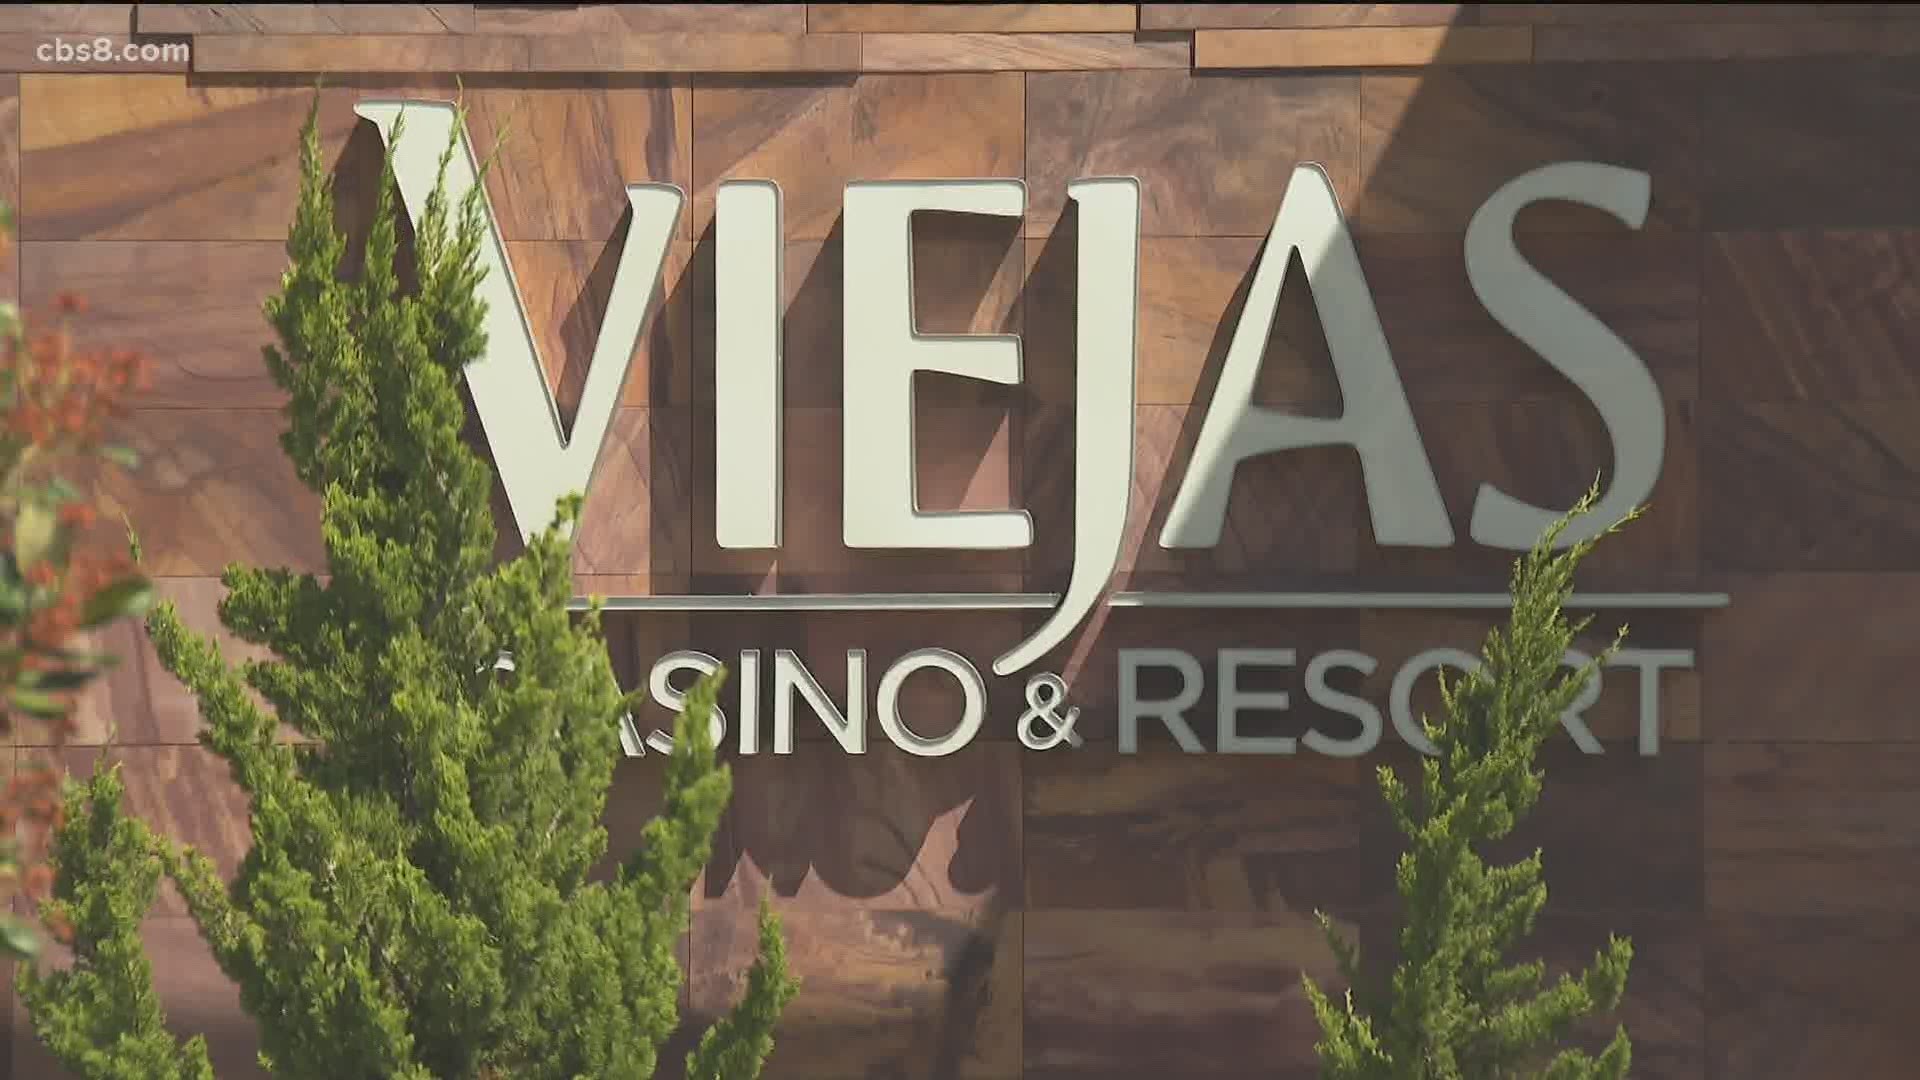 directions to viejas casino